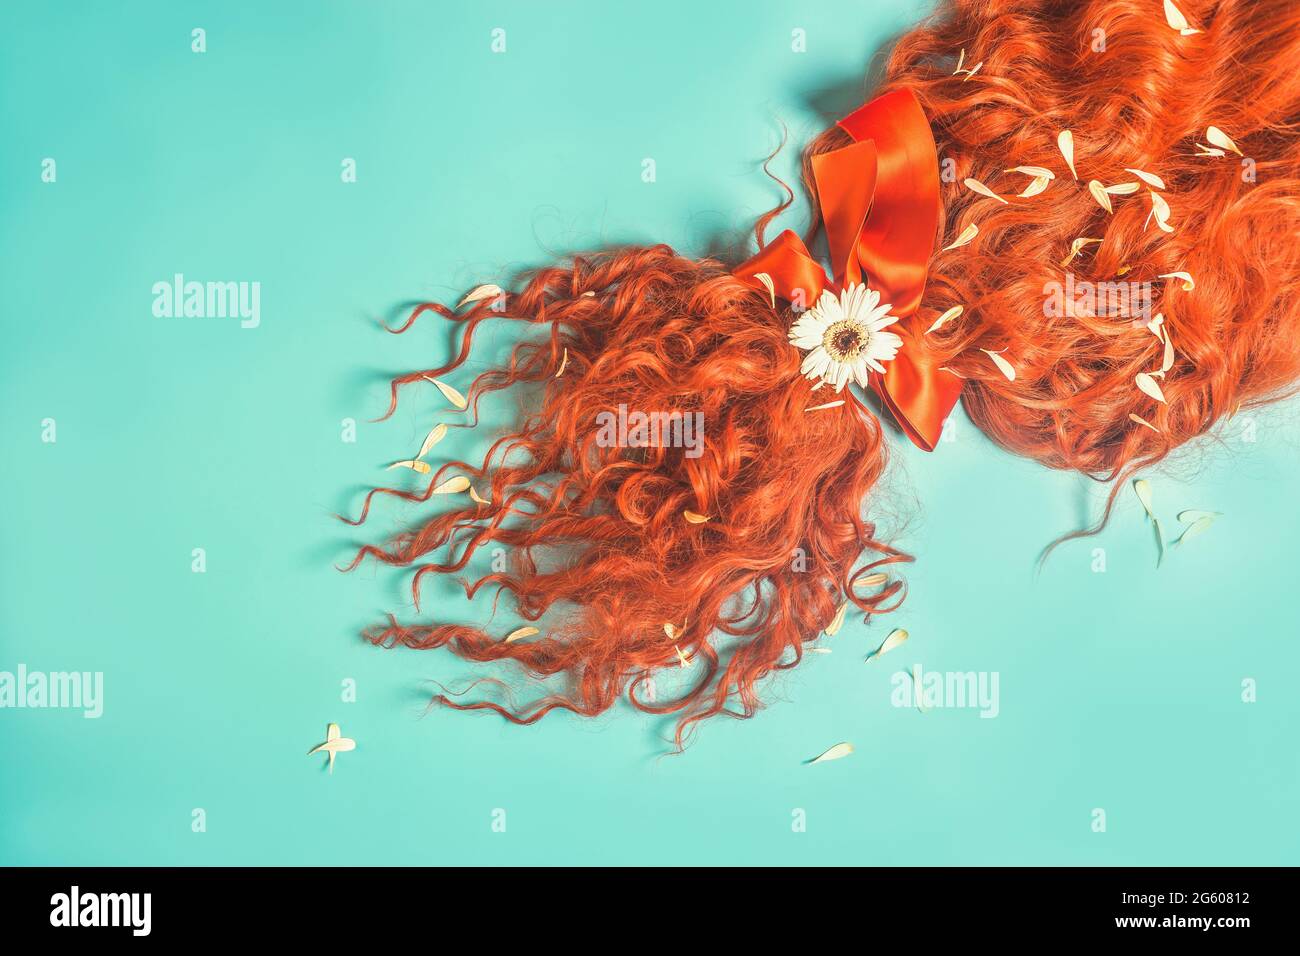 Healthy red curly hair tied in a ponytail with a red ribbon on a blue background with daisies and petals and other flowers. View from above Stock Photo